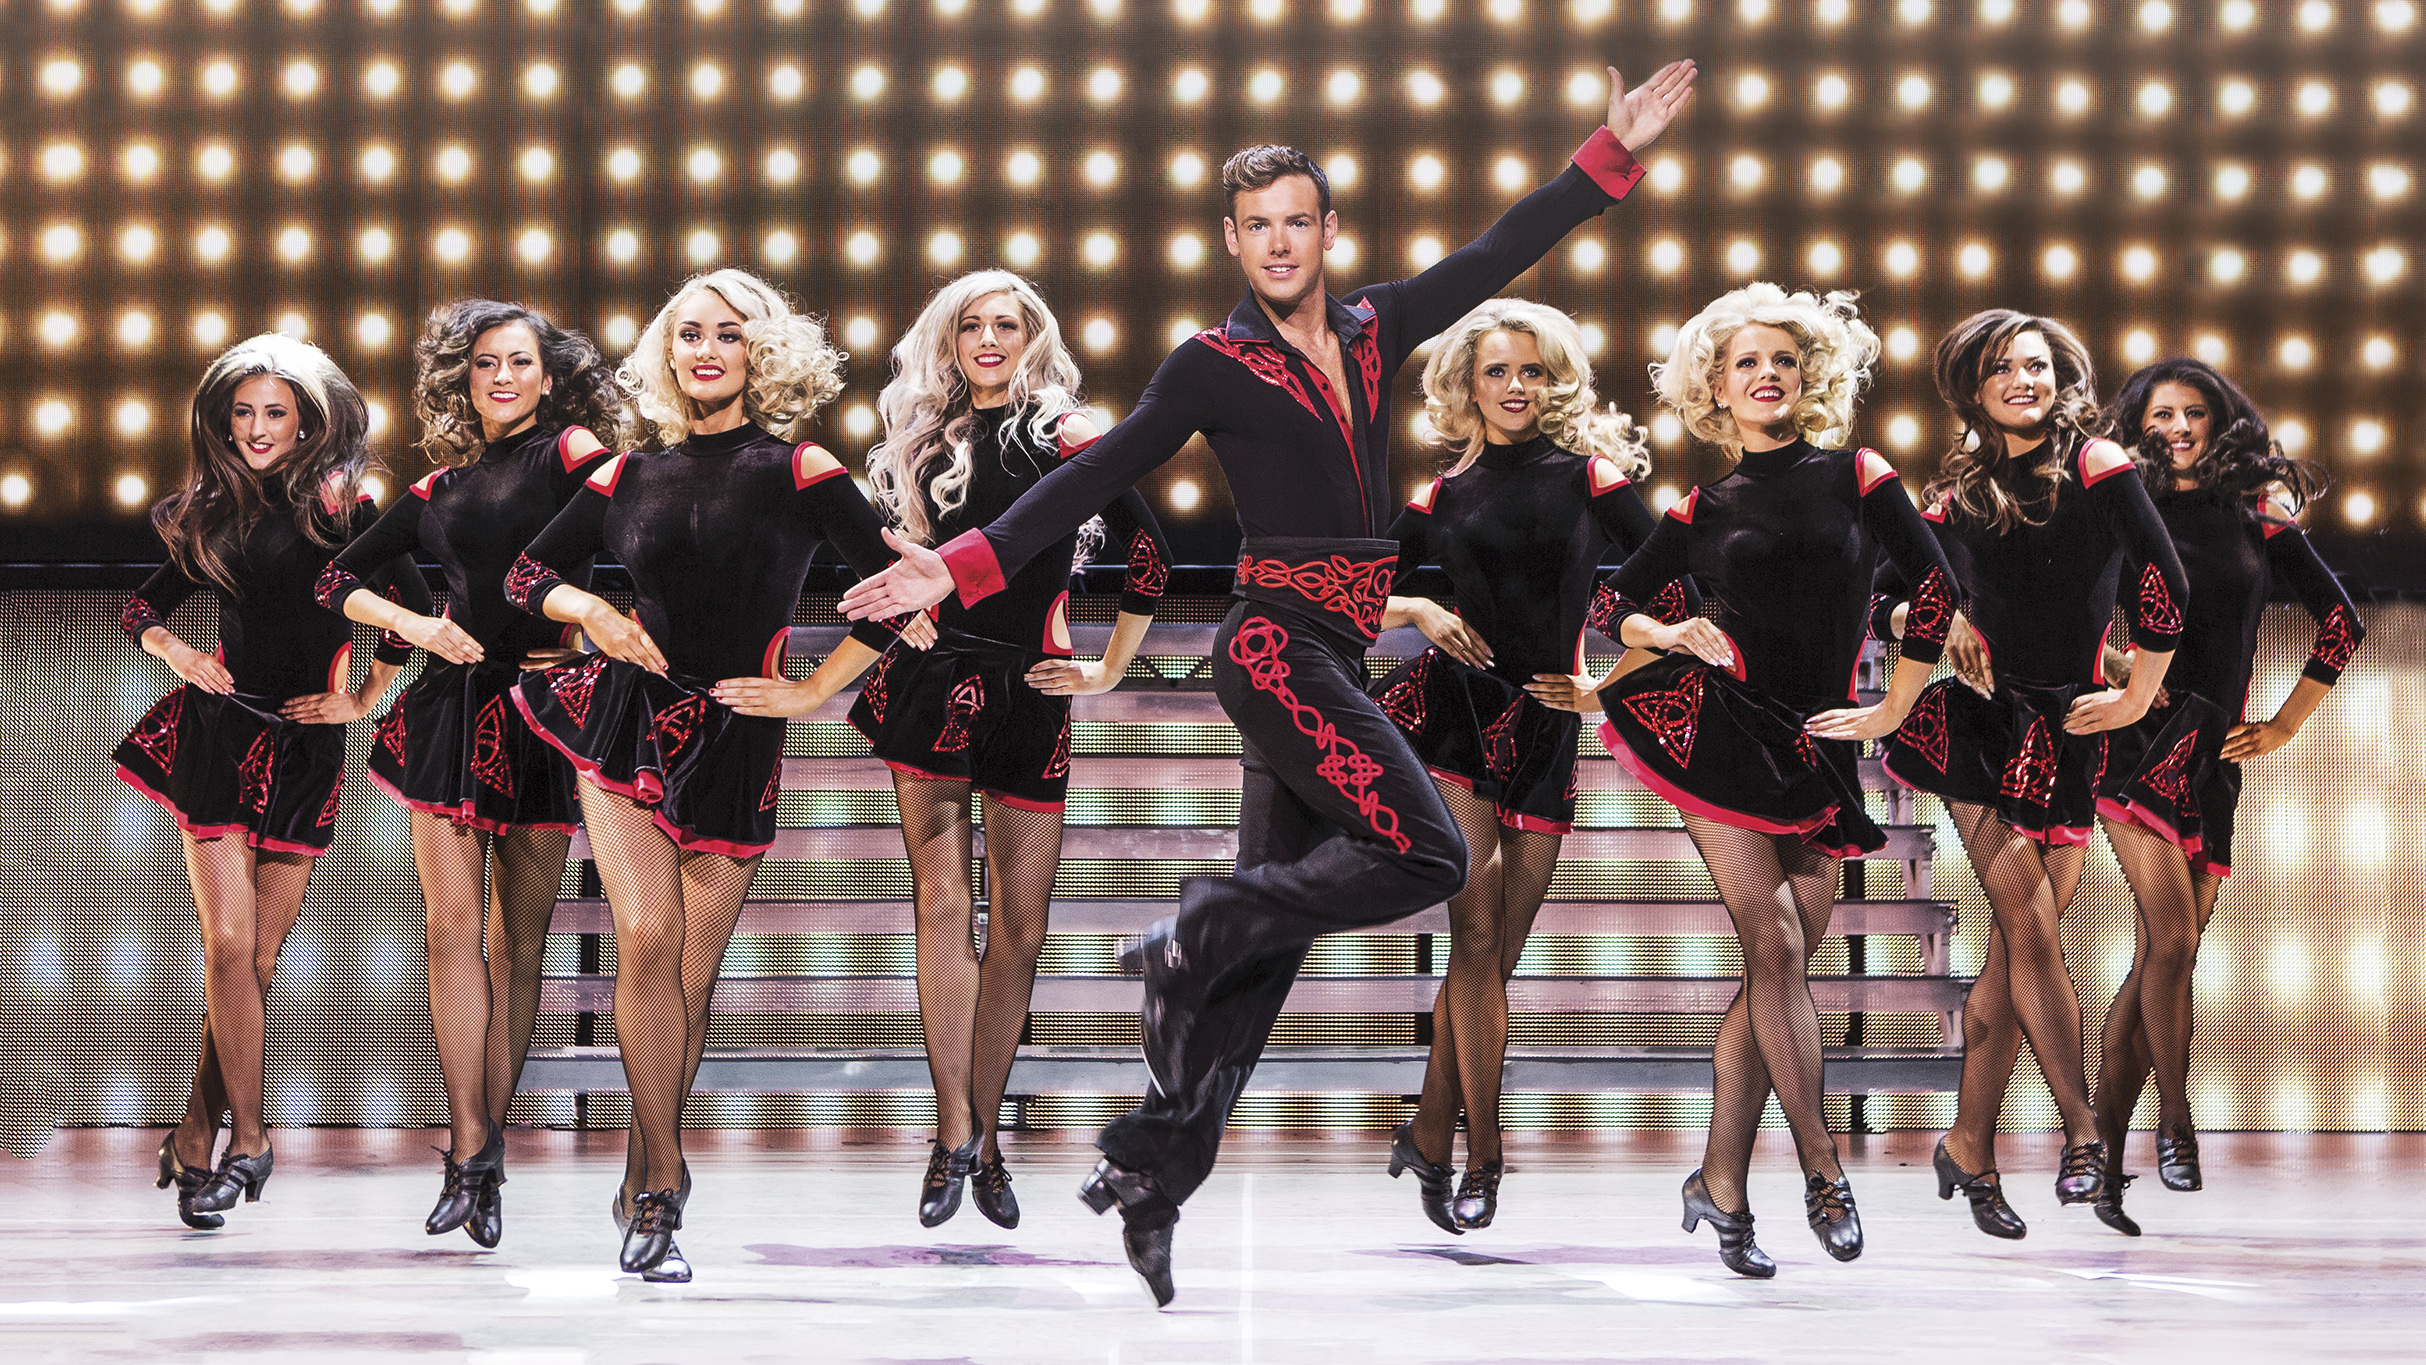 Michael Flatley's Lord of The Dance - 25 Years of Standing Ovations